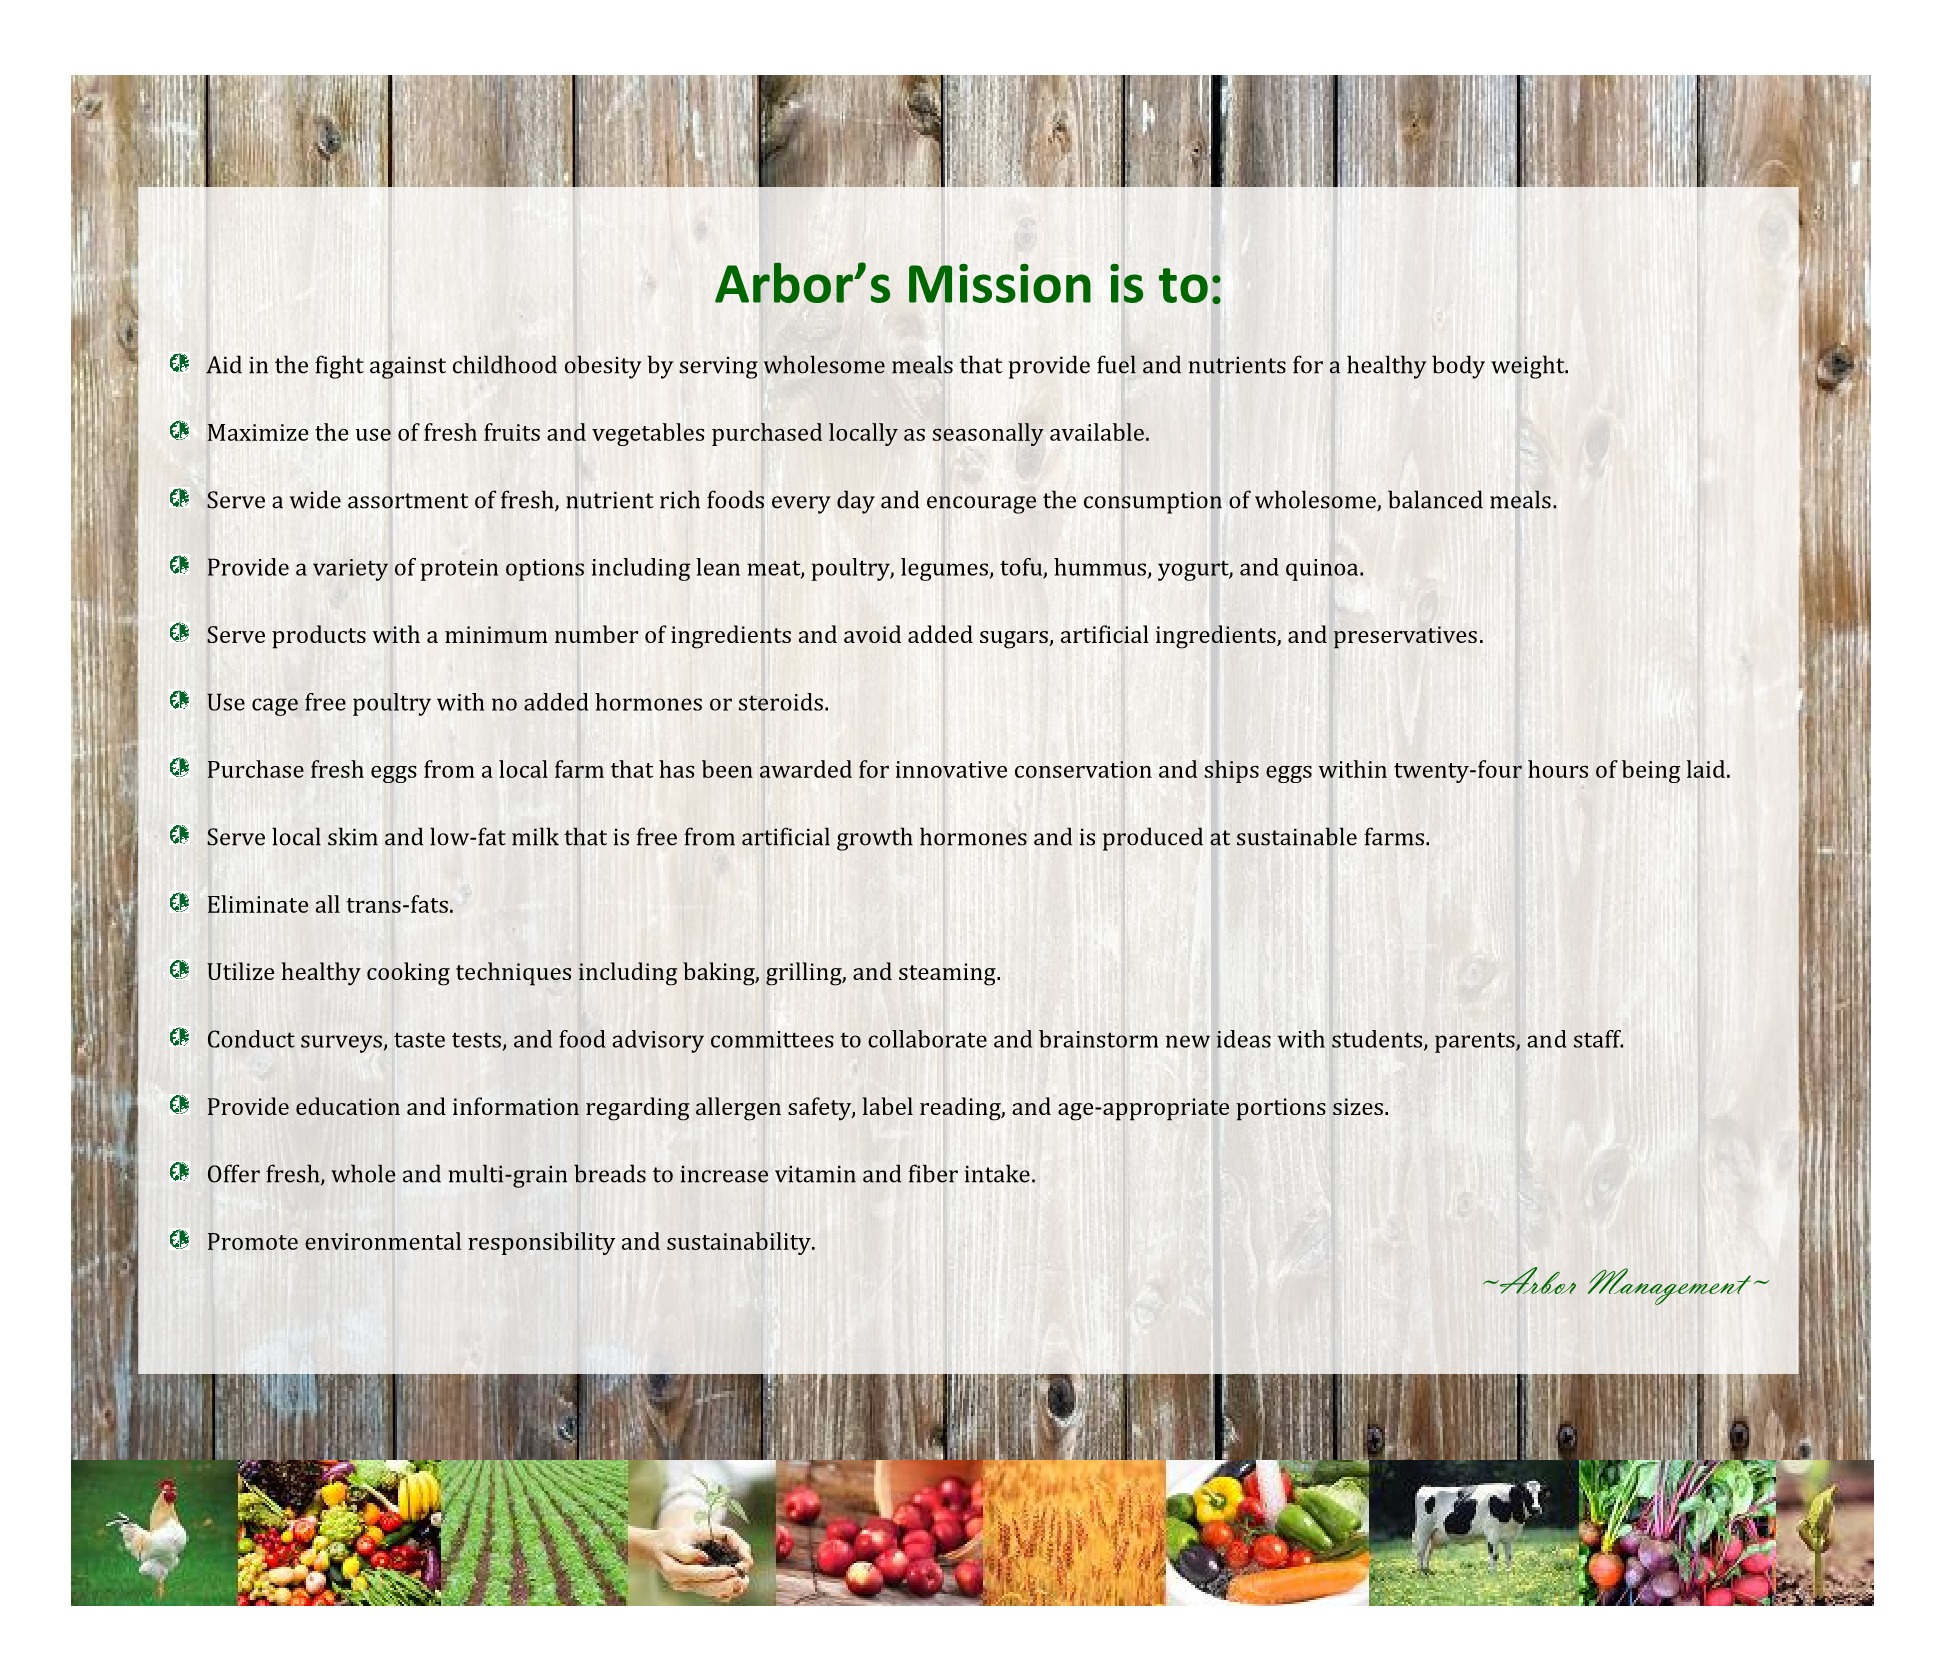 Arbor’s Mission is to:   	Aid in the fight against childhood obesity by serving wholesome meals that provide fuel and nutrients for a healthy body weight.   	Maximize the use of fresh fruits and vegetables purchased locally as seasonally available.   	Serve a wide assortment of fresh, nutrient rich foods every day and encourage the consumption of wholesome, balanced meals.   	Provide a variety of protein options including lean meat, poultry, legumes, tofu, hummus, yogurt, and quinoa.   	Serve products with a minimum number of ingredients and avoid added sugars, artificial ingredients, and preservatives.   	Use cage free poultry with no added hormones or steroids.   	Purchase fresh eggs from a local farm that has been awarded for innovative conservation and ships eggs within twenty-four hours of being laid.   	Serve local skim and low-fat milk that is free from artificial growth hormones and is produced at sustainable farms.   	Eliminate all trans-fats.   	Utilize healthy cooking techniques including baking, grilling, and steaming.   	Conduct surveys, taste tests, and food advisory committees to collaborate and brainstorm new ideas with students, parents, and staff.   	Provide education and information regarding allergen safety, label reading, and age-appropriate portions sizes.   	Offer fresh, whole and multi-grain breads to increase vitamin and fiber intake.   	Promote environmental responsibility and sustainability.